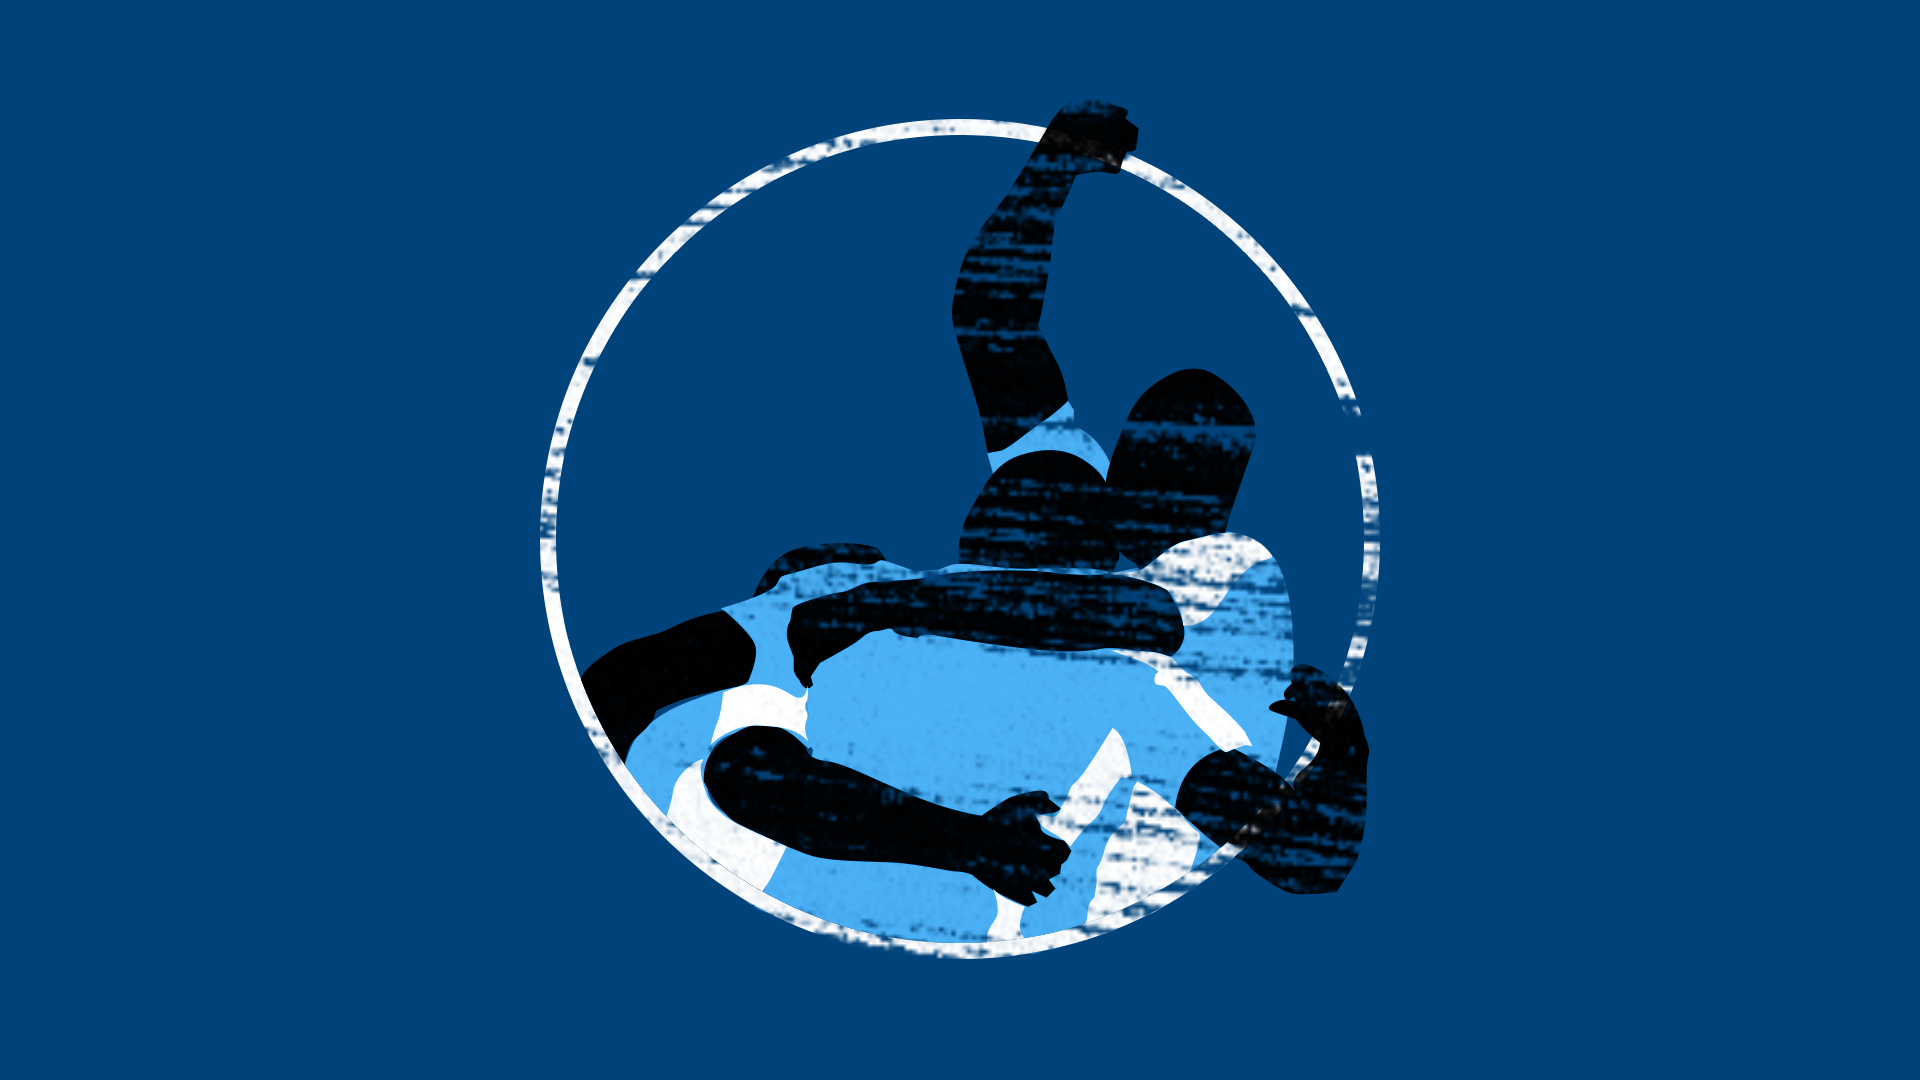 Icon for World Champions